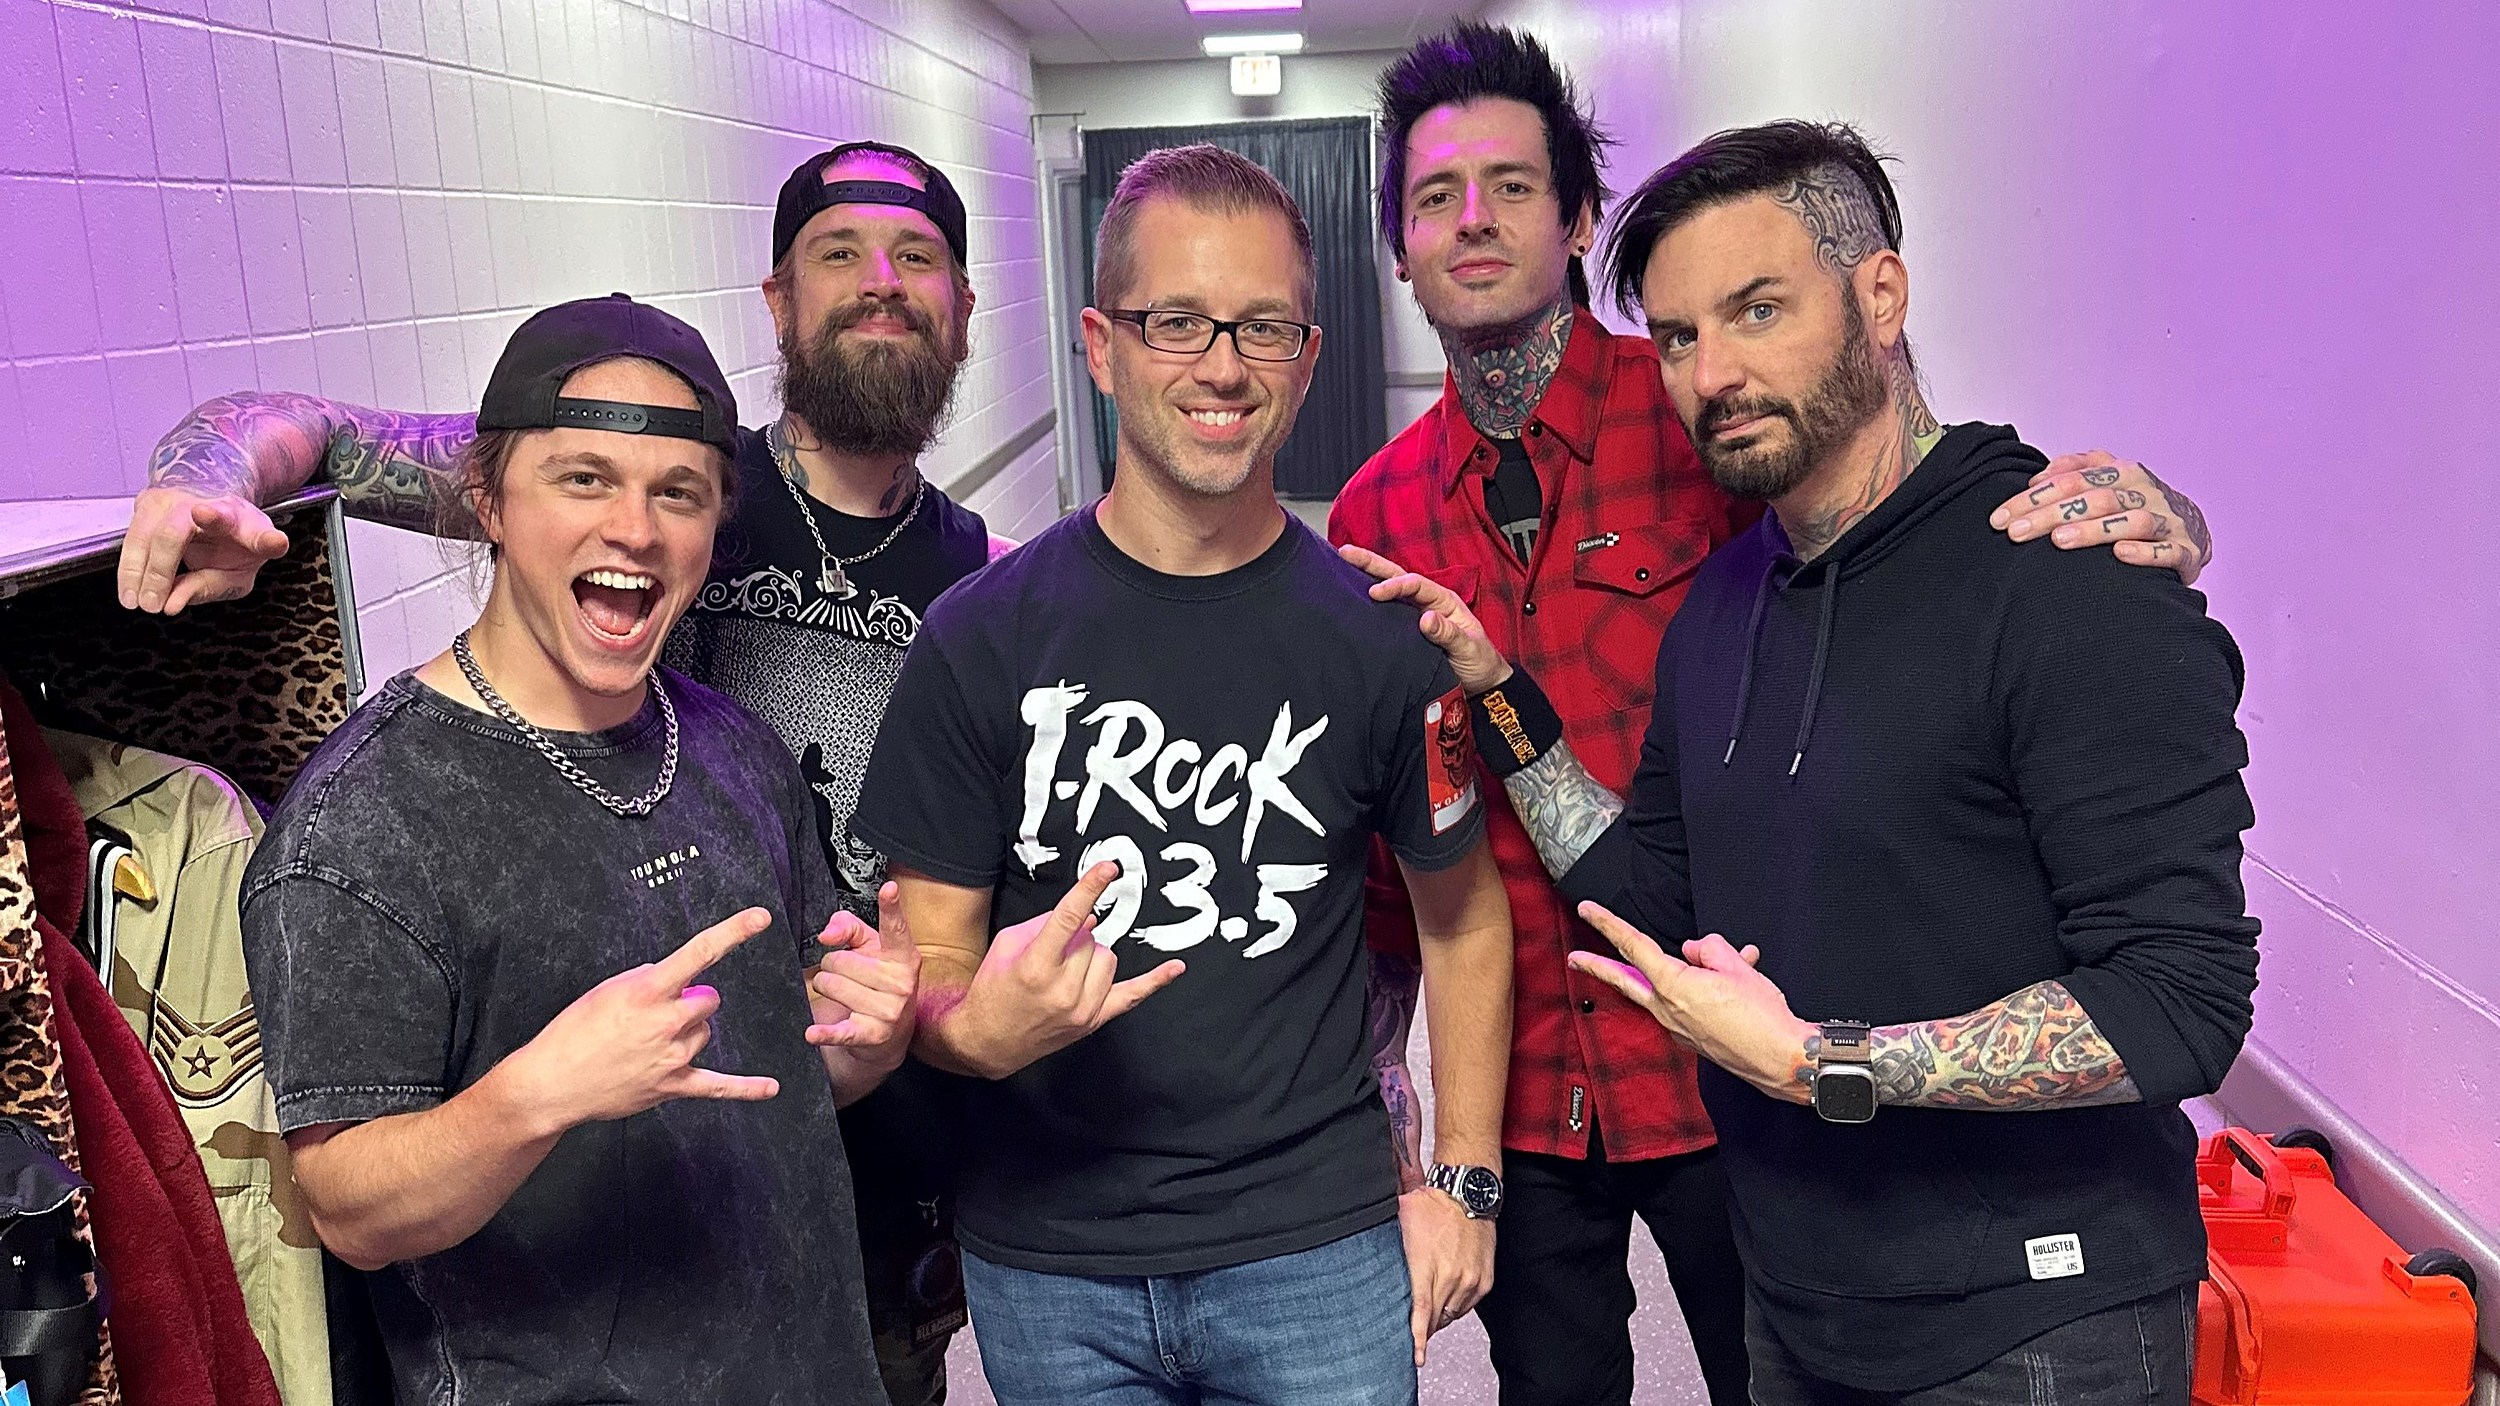 I-Rock 93.5 Talks with Jason Hook About His New Band Flat Black